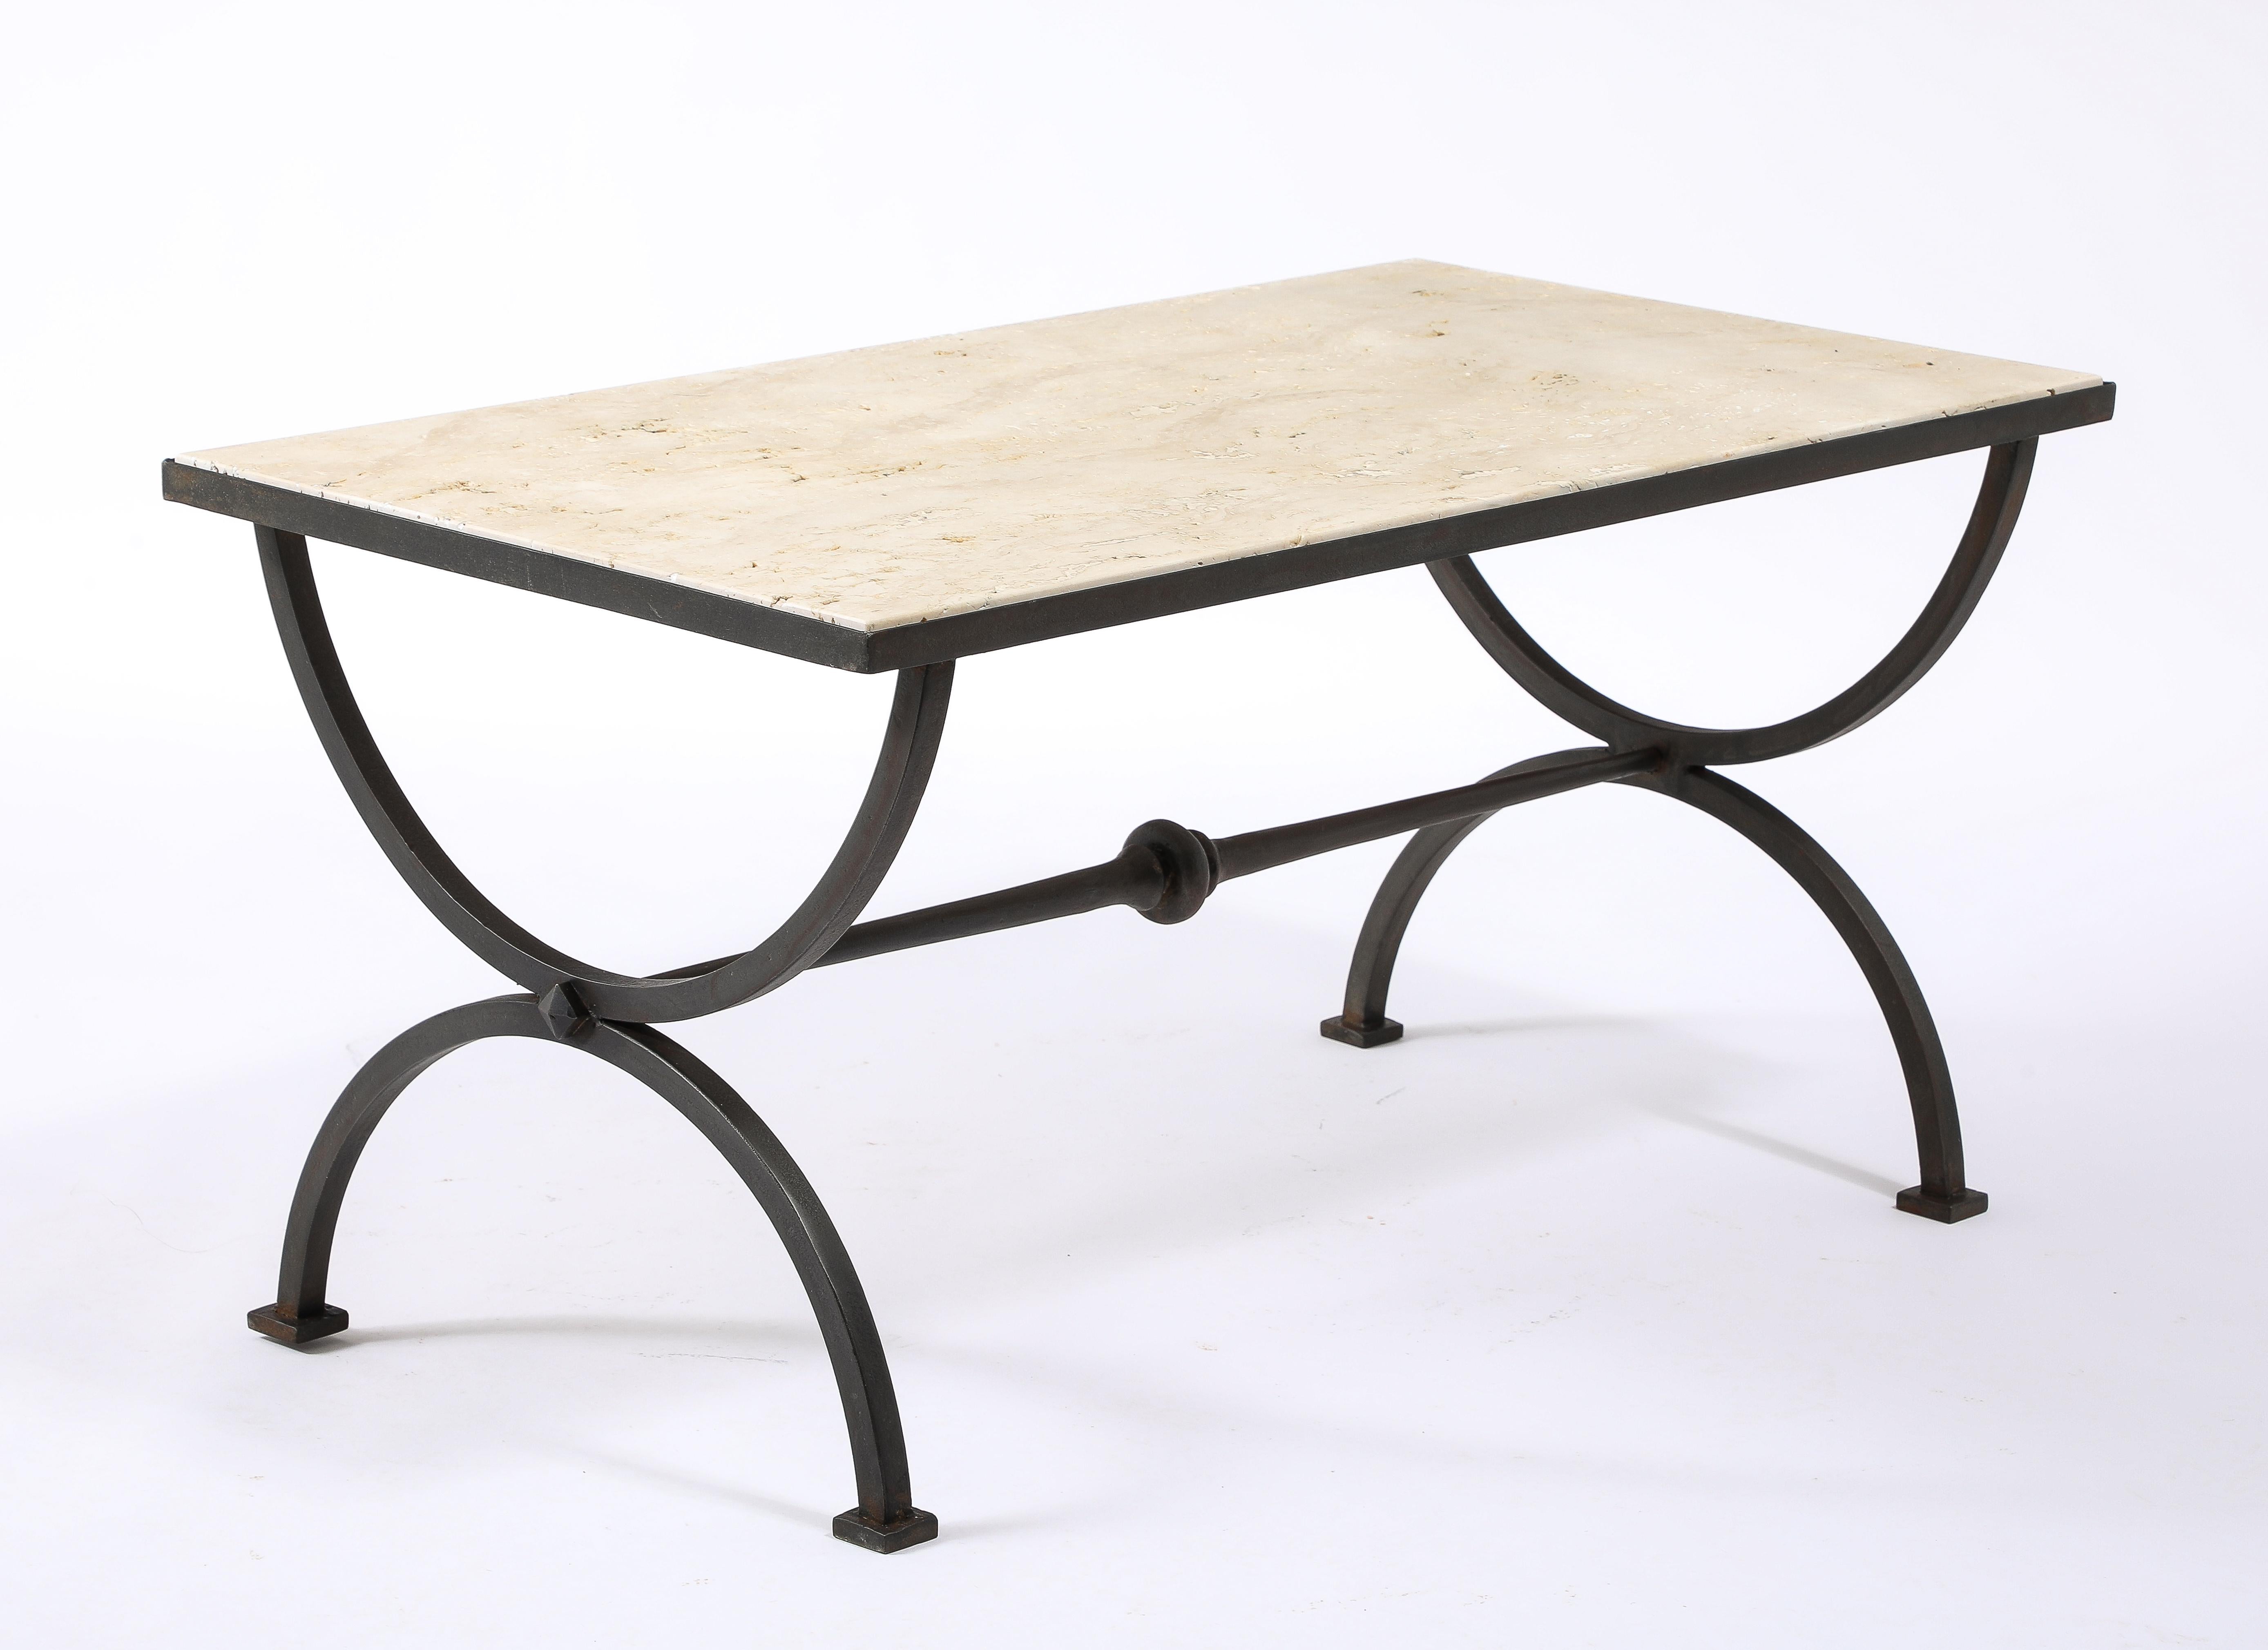 Travertin Marble & Wrought Iron Coffee Table, France 1940's For Sale 6